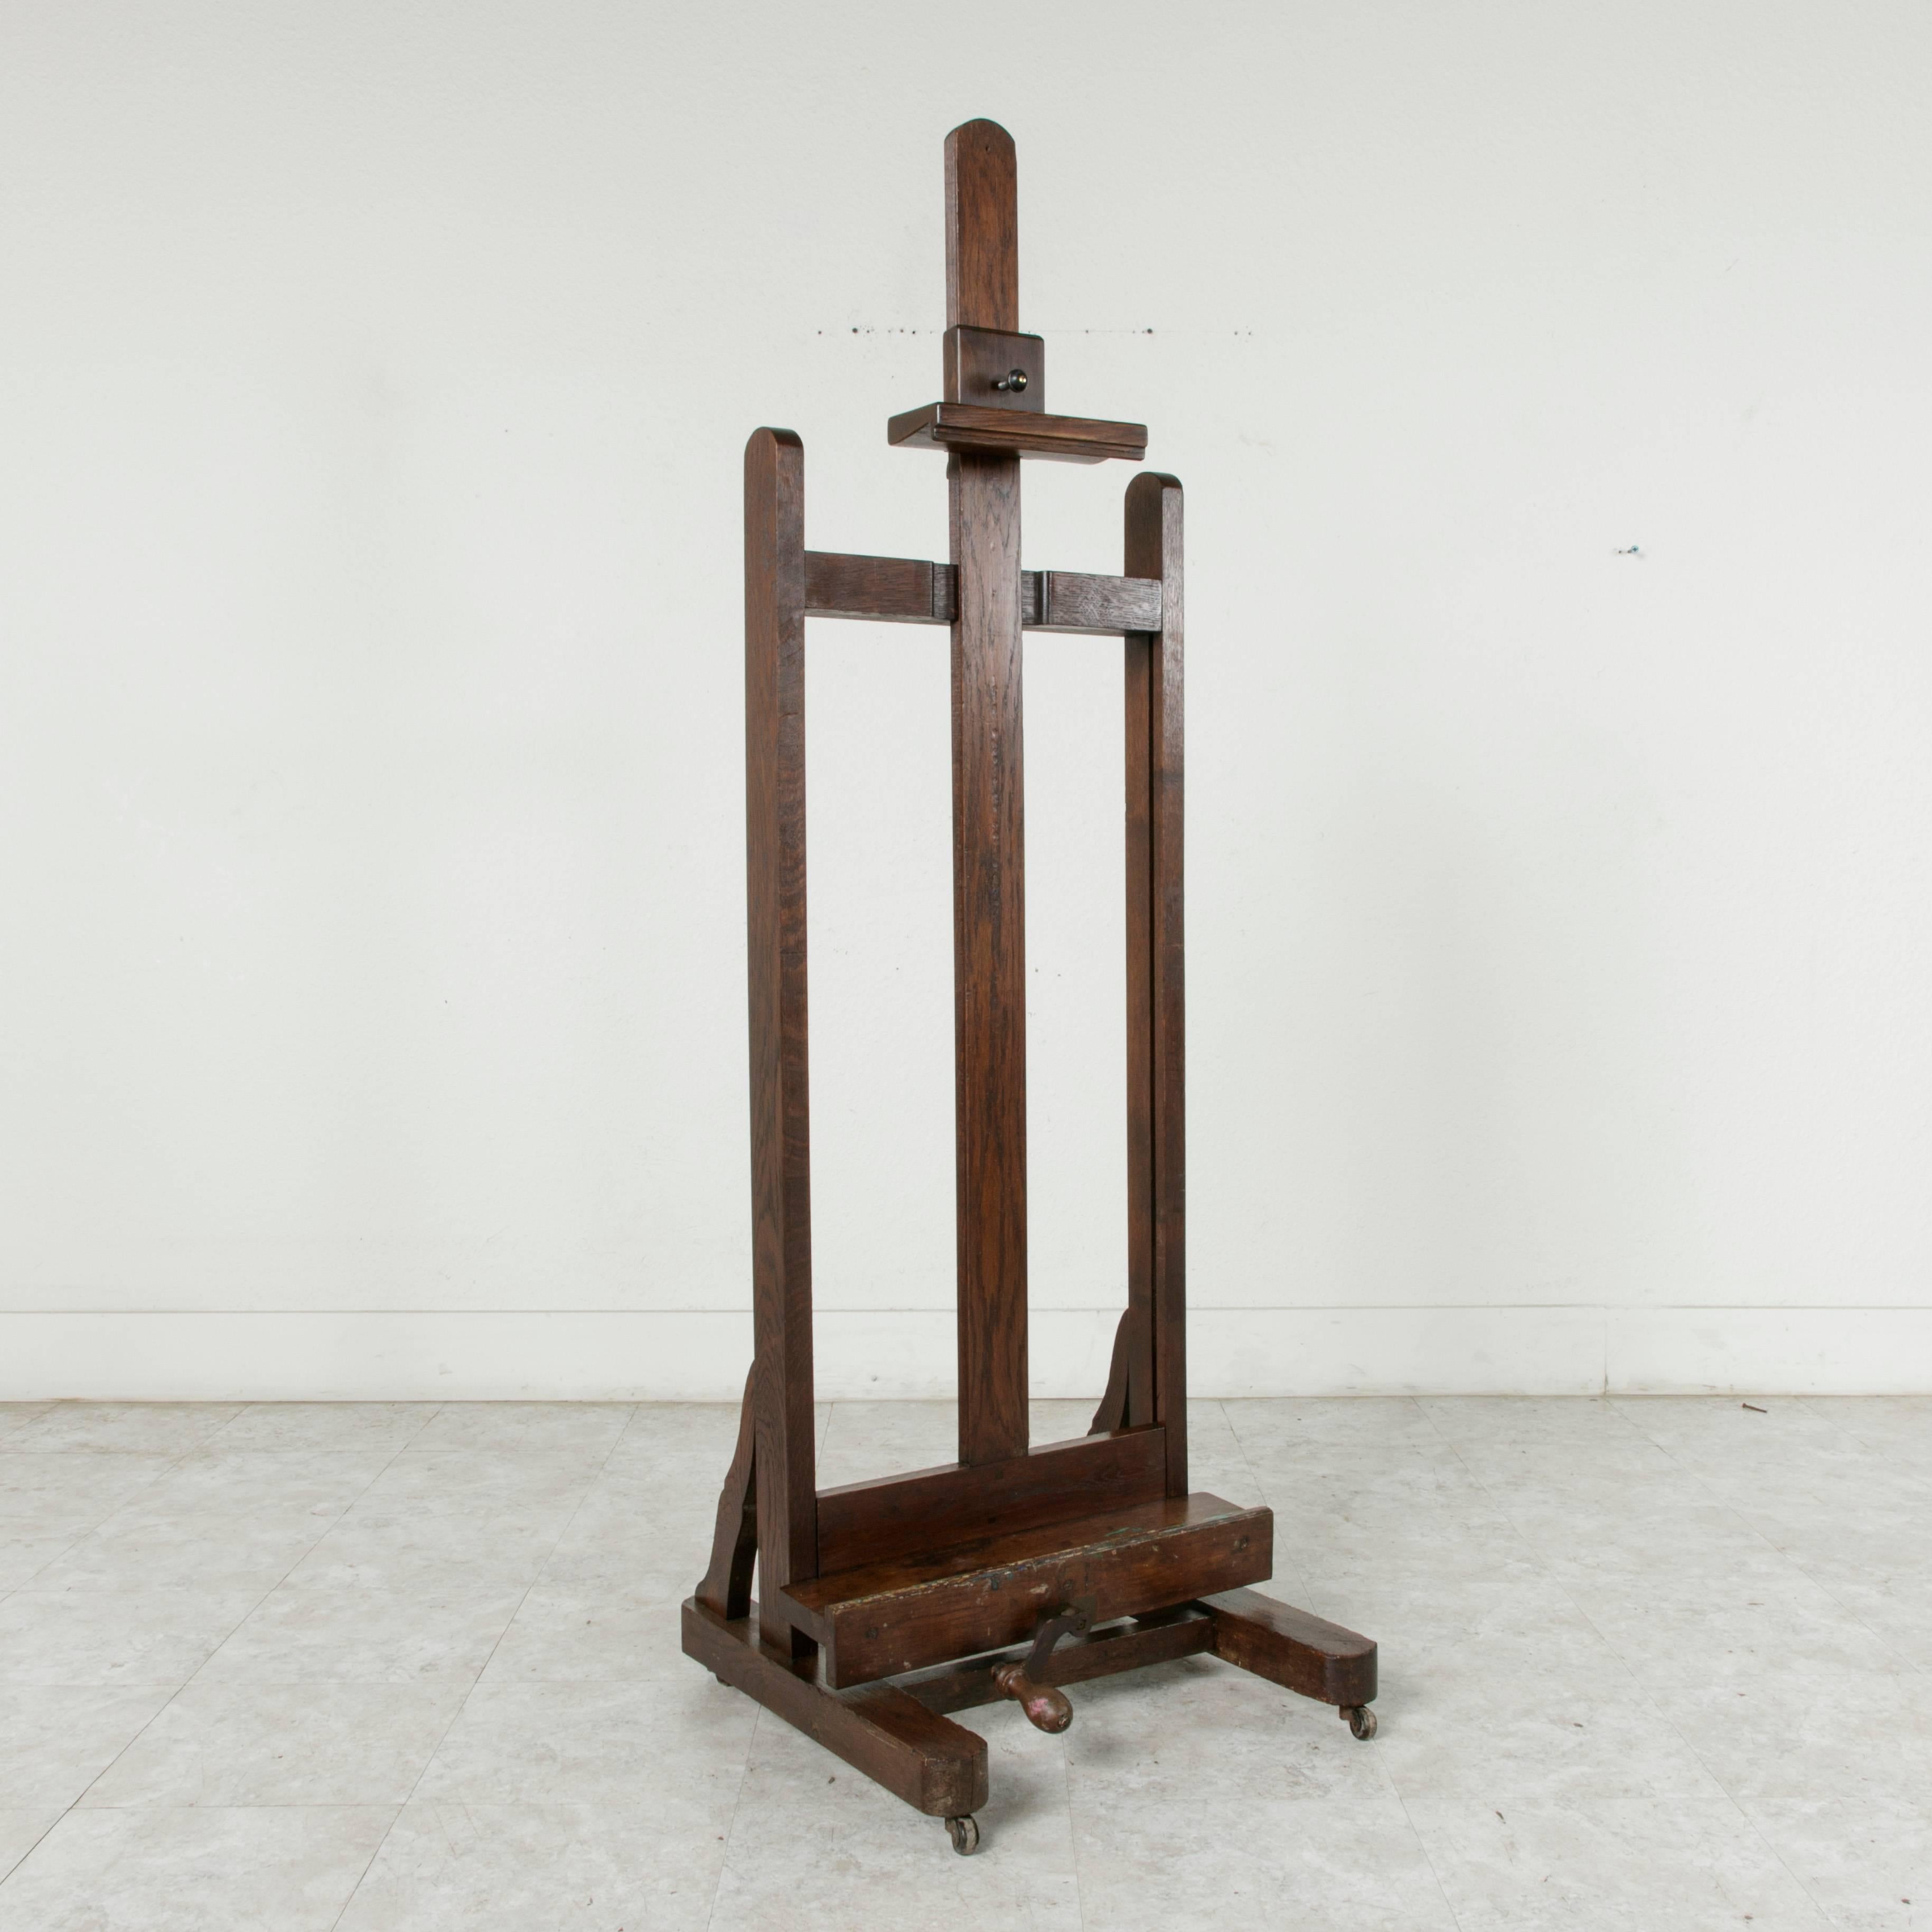 This grand early 20th century oak artist's easel has its original functioning crank mechanism to adjust the tray height. With an adjustable height of 64 inches to 96 inches, this sturdy easel can handle impressively large canvases or make an